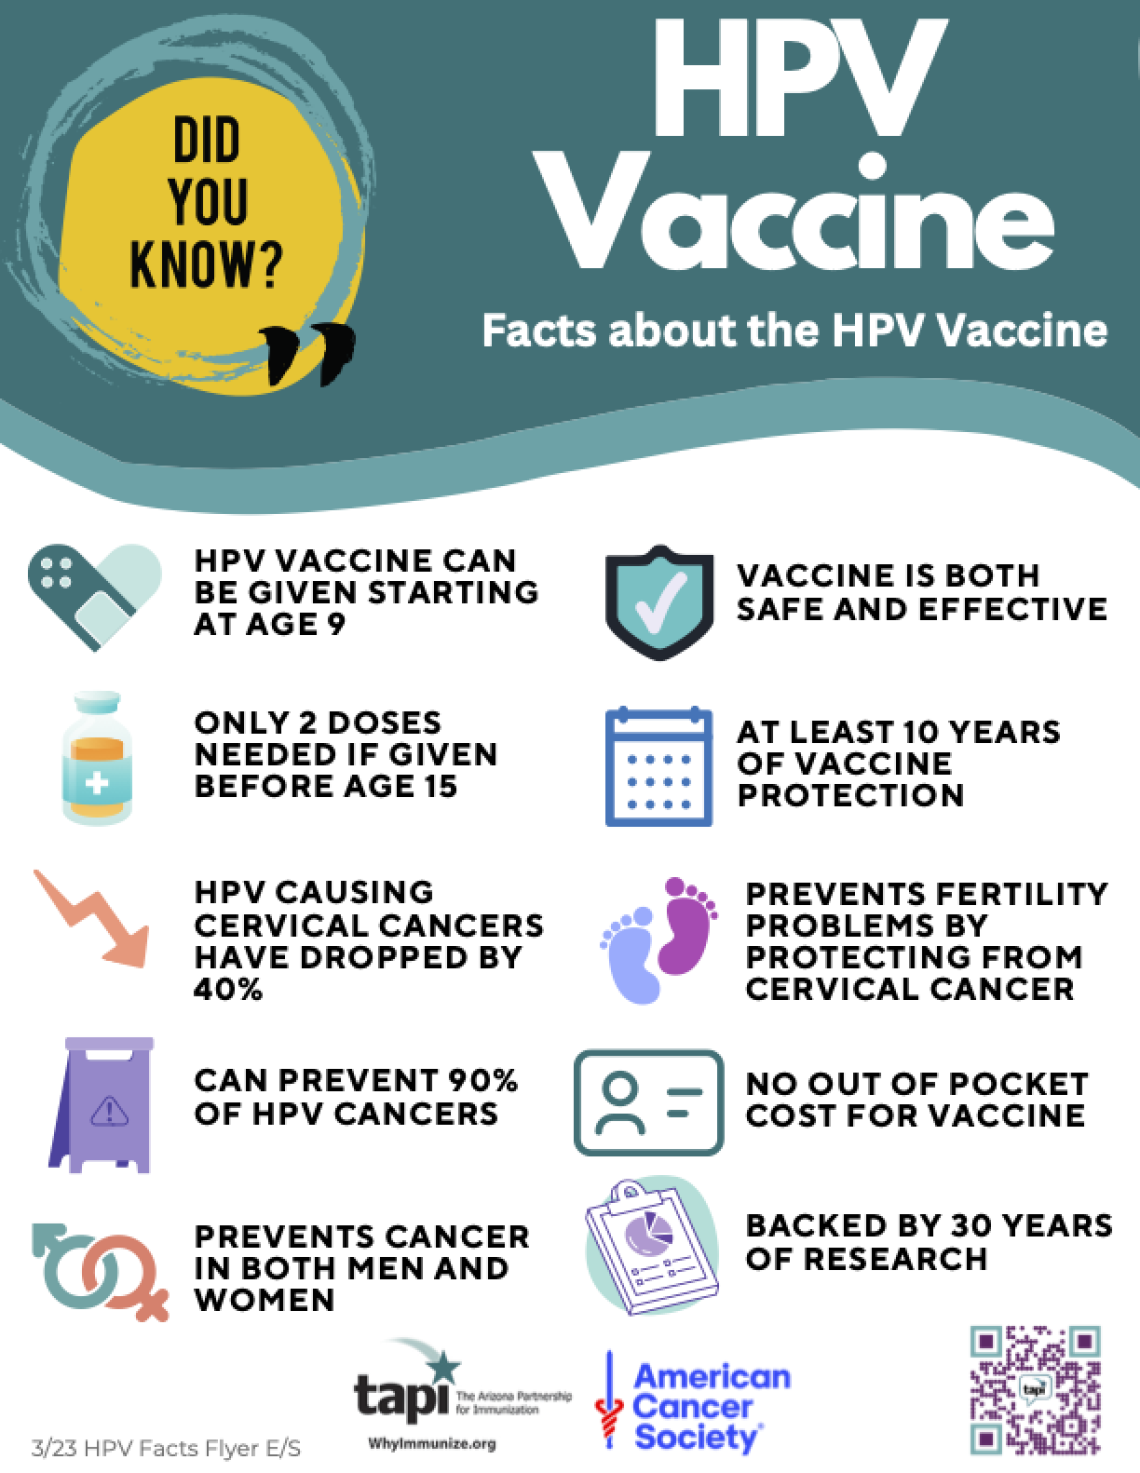 HPV Vaccine Facts